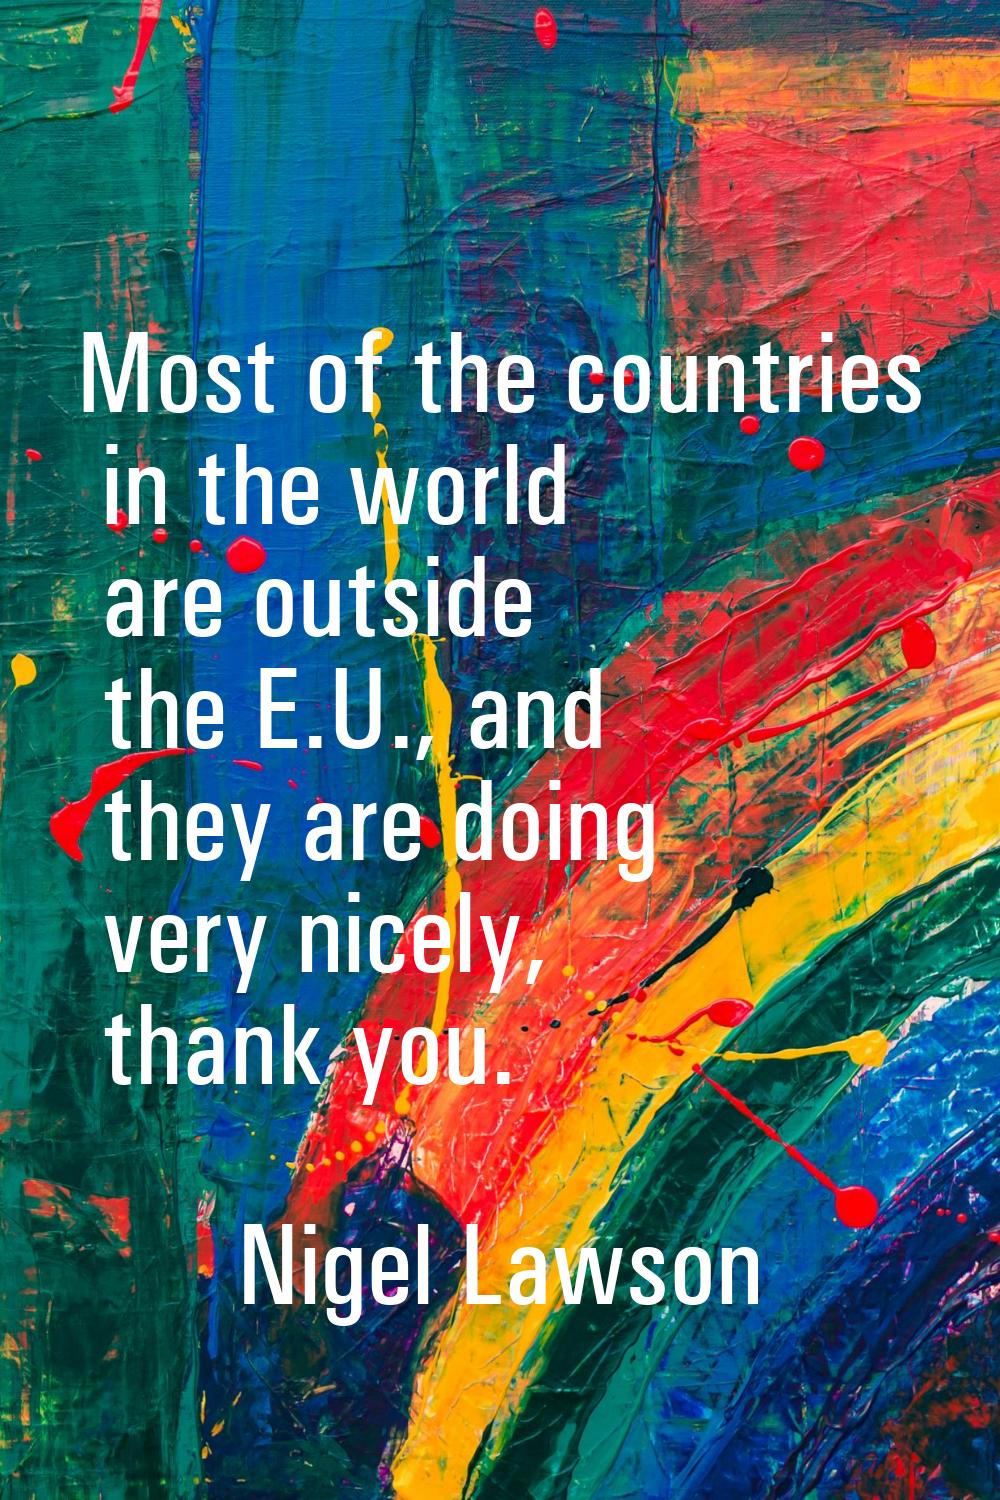 Most of the countries in the world are outside the E.U., and they are doing very nicely, thank you.